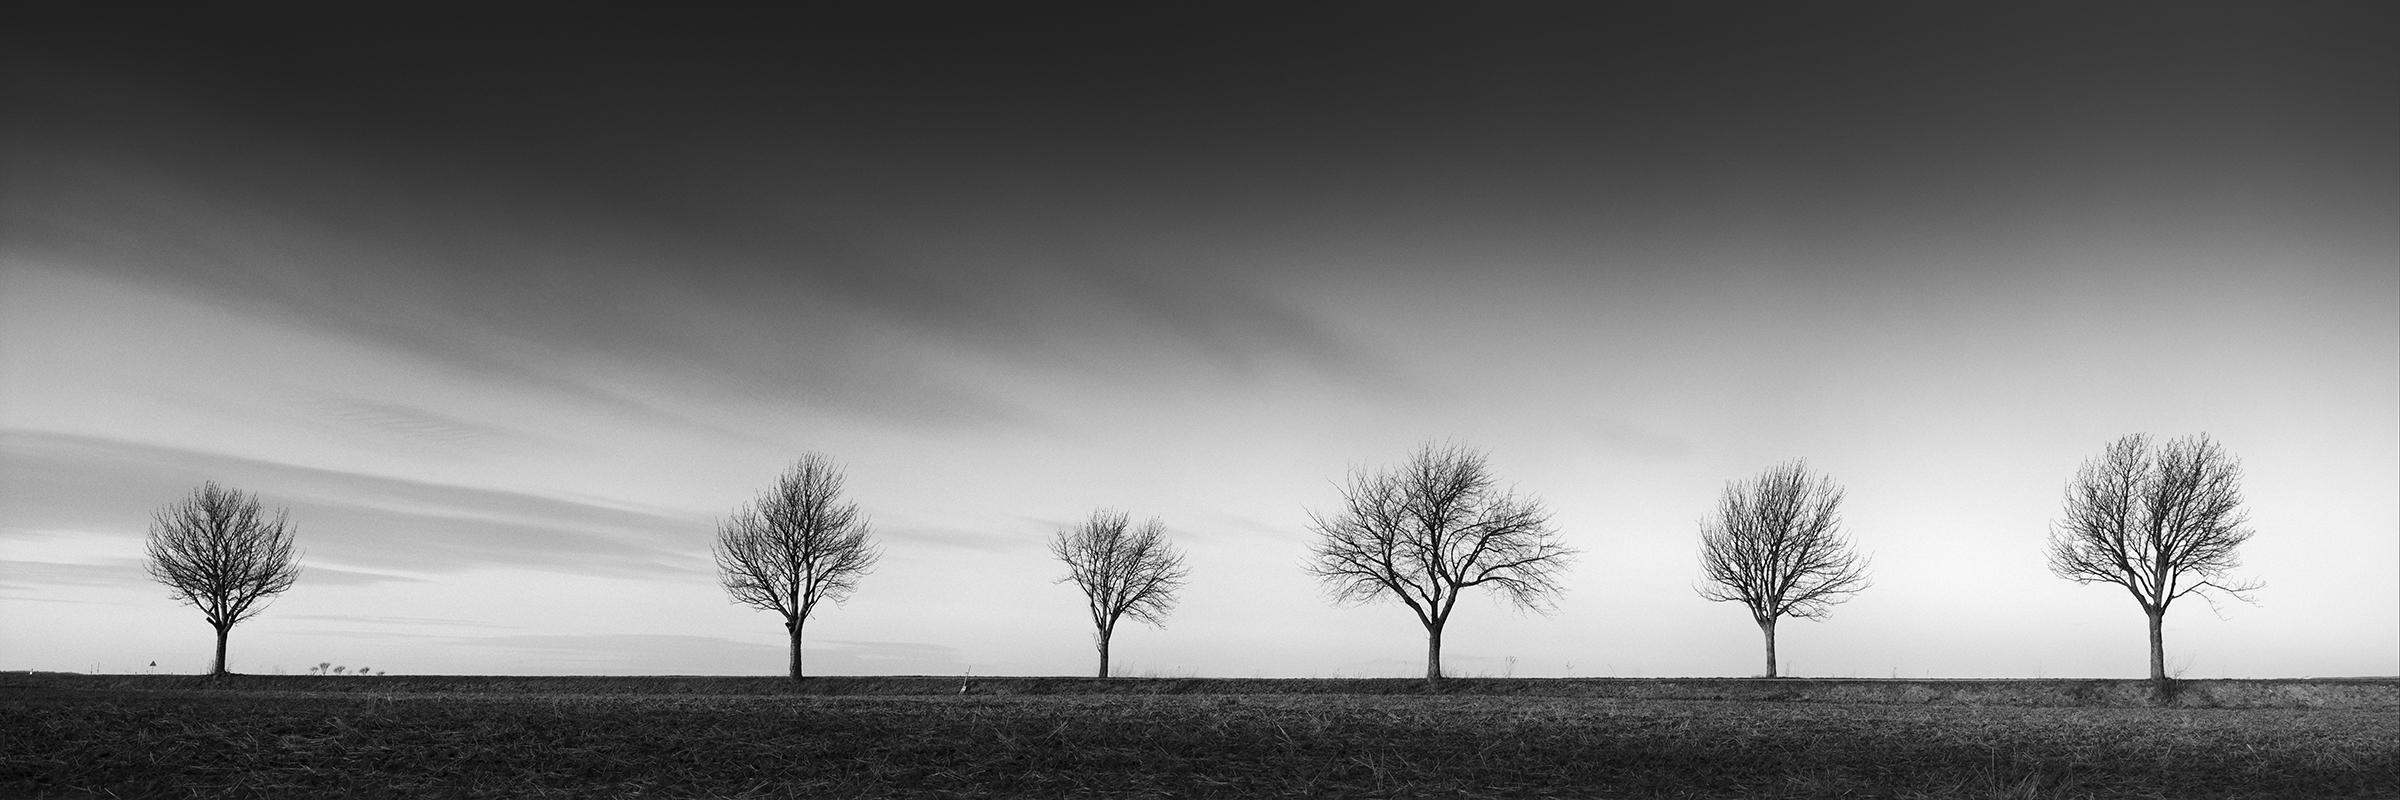 Gerald Berghammer Black and White Photograph - Row of six Cherry Trees, sunset, black and white panorama photography, landscape